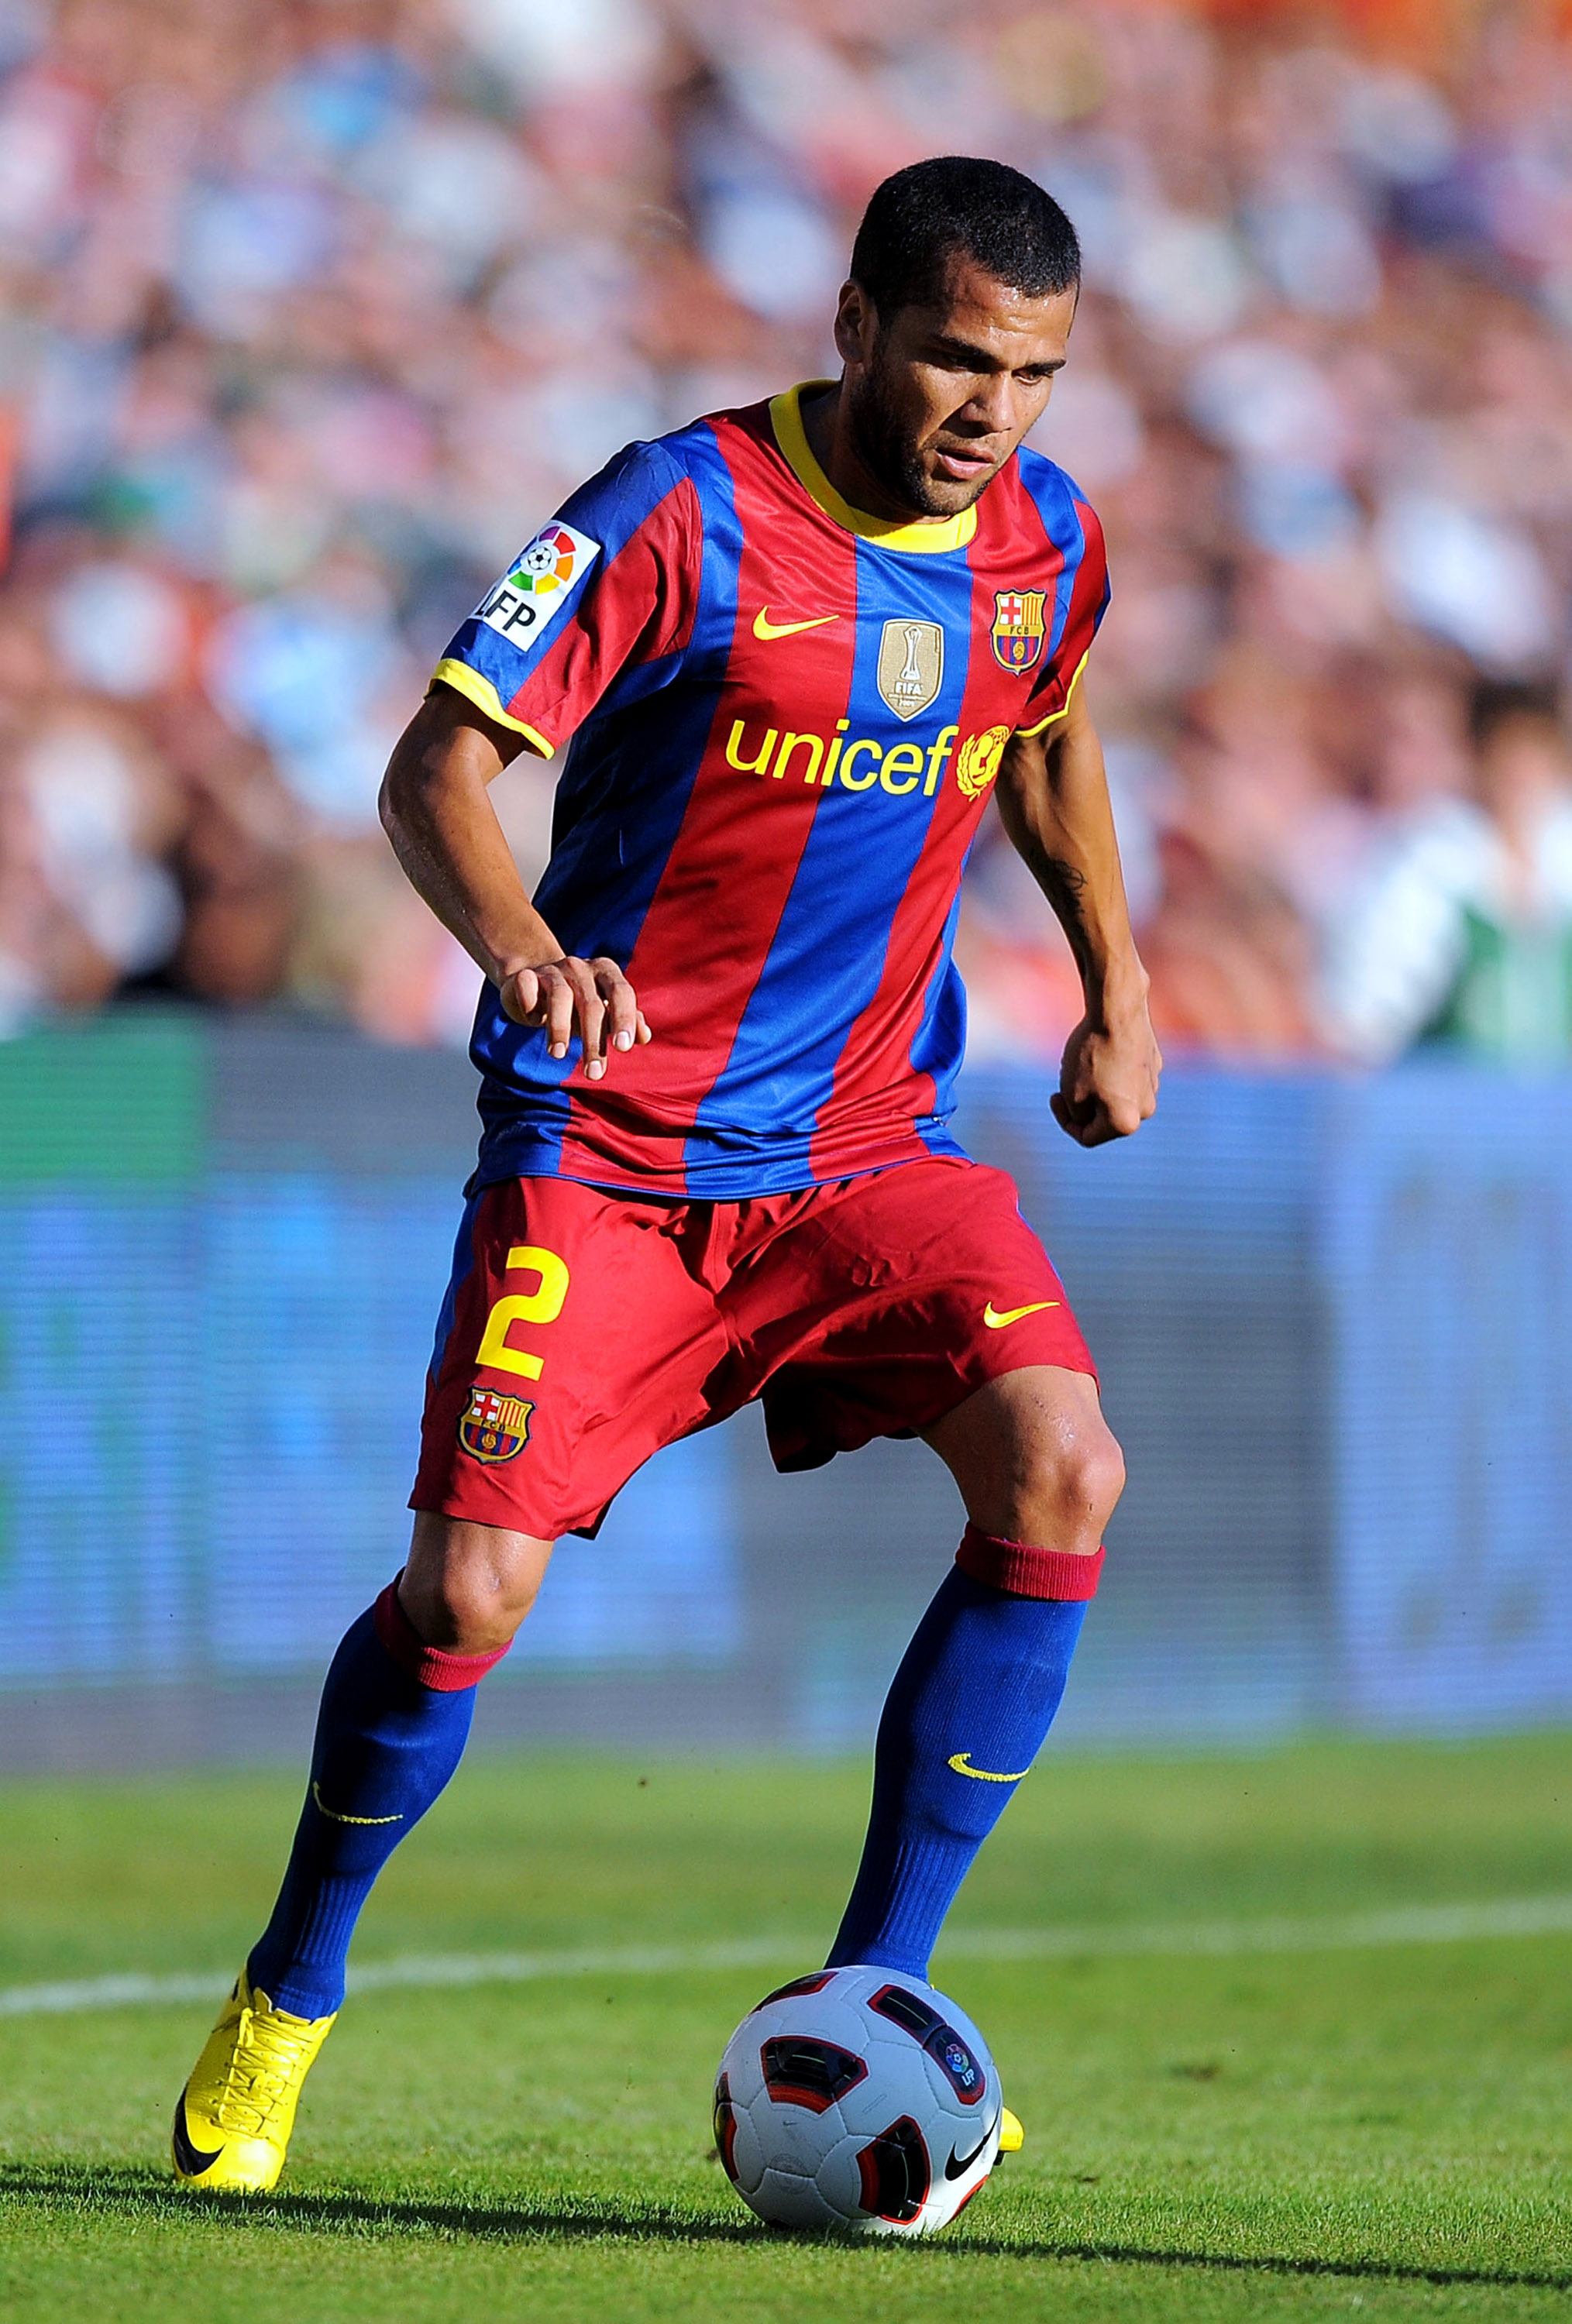 SANTANDER, SPAIN - AUGUST 29: Dani Alves of Barcelona controls the ball during the La Liga match between Racing Santander and Barcelona at El Sardinero stadium on August 29, 2010 in Santander, Spain.  (Photo by Denis Doyle/Getty Images)